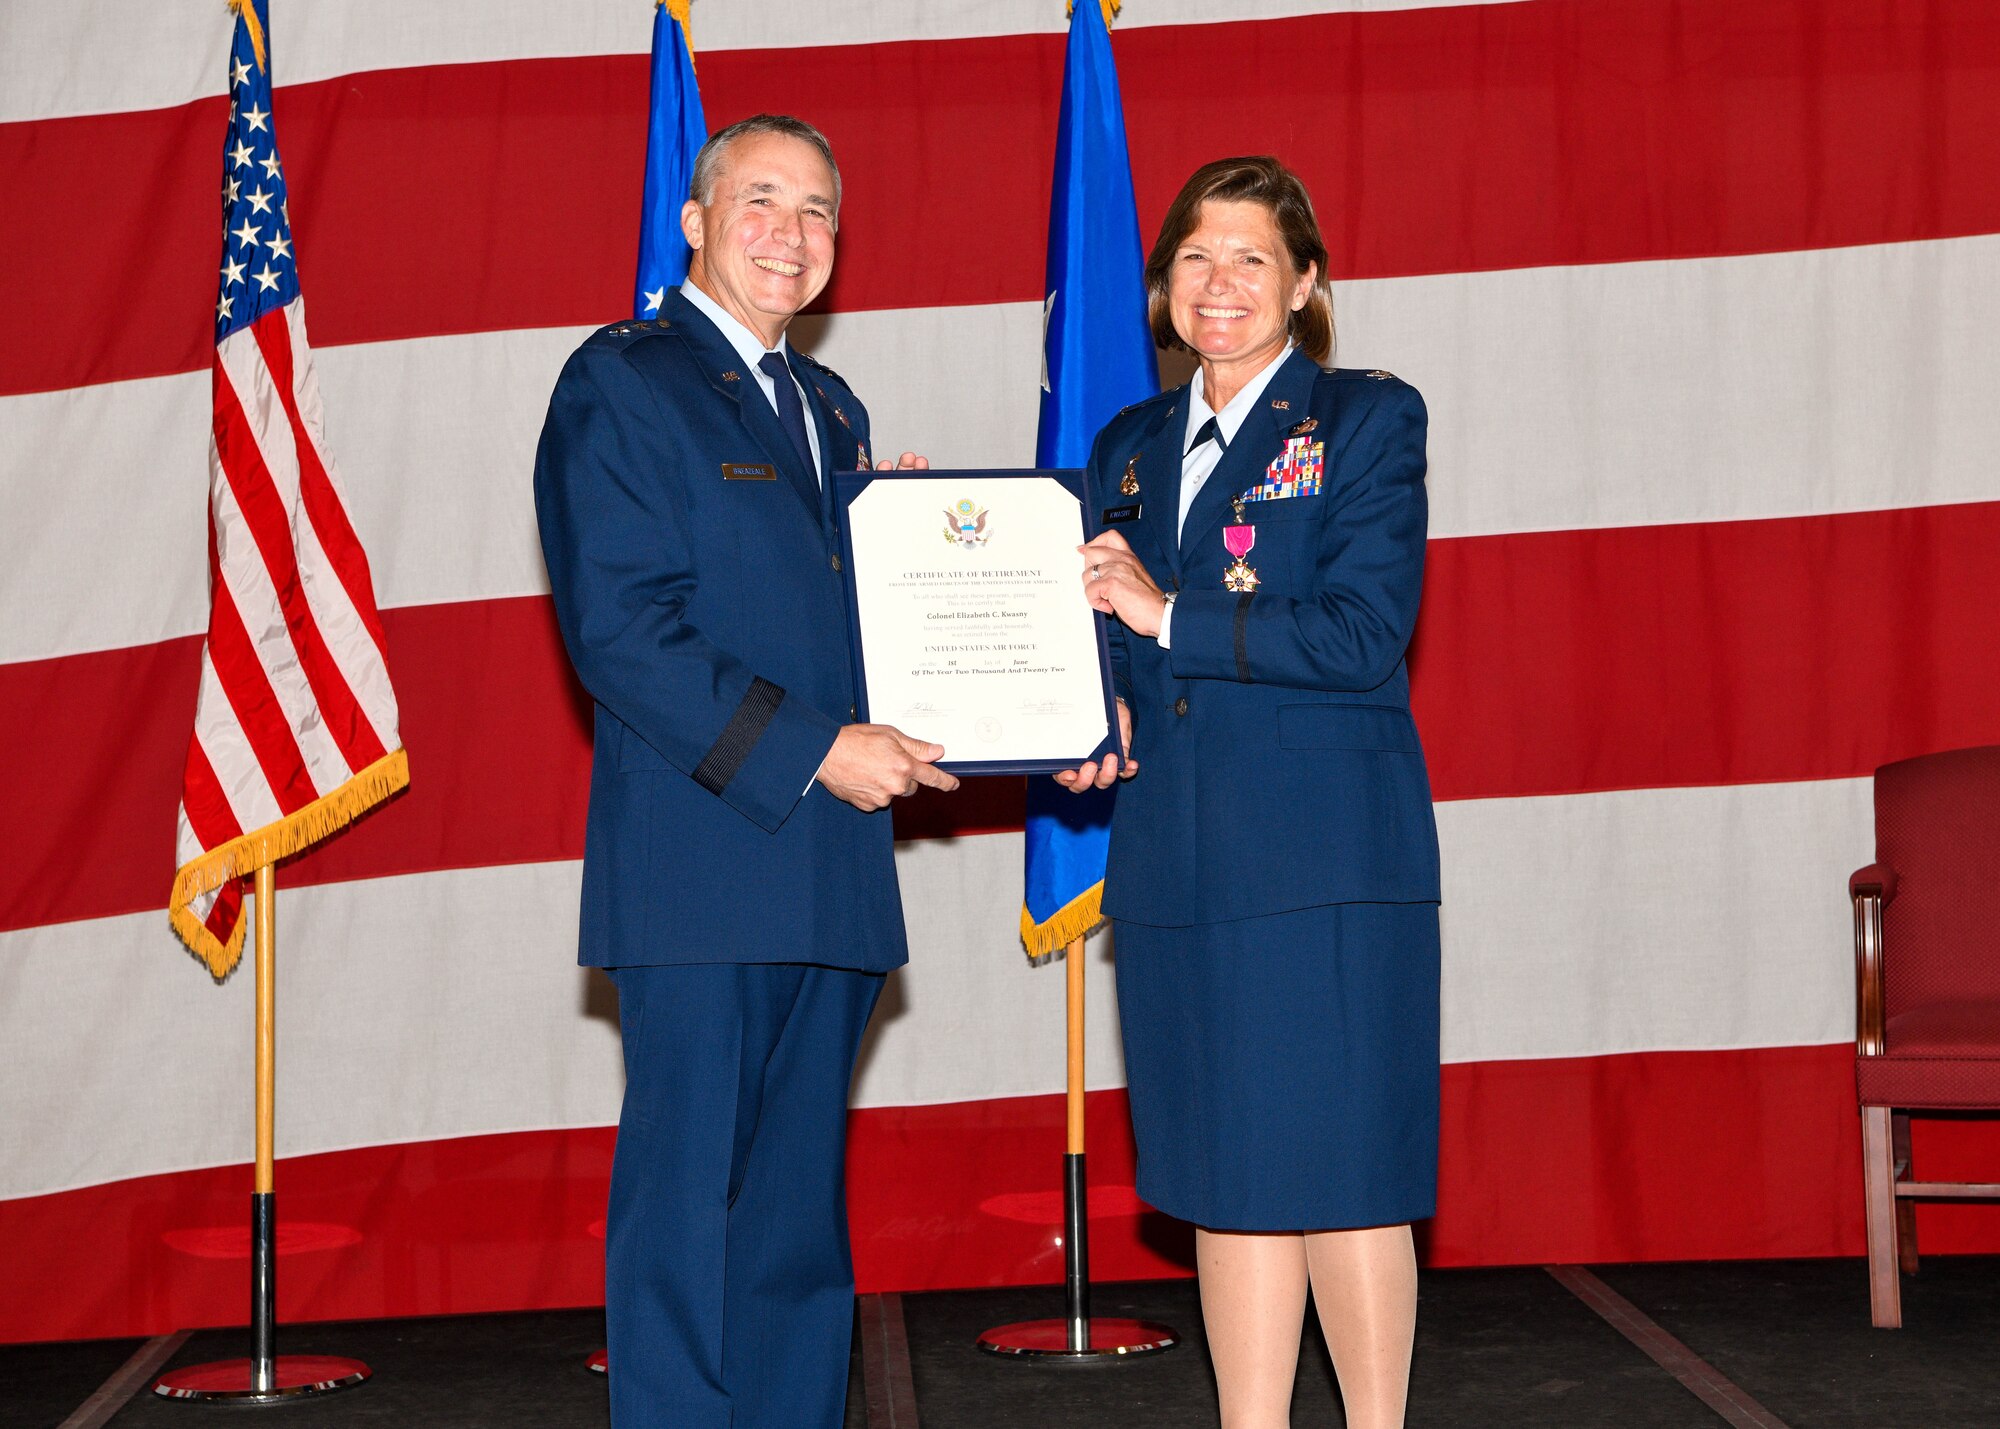 Colonel Elizabeth "Beth" Kwasny accepts a Certificate of Retirement from Major General John Breazeale during a retirement ceremony on Saturday, April 30, 2022 at the Naval Air Station Joint Reserve Base Fort Worth, Texas. Kwasny served 31 years in the United States Air Force, both on Active Duty and as a traditional reservist.